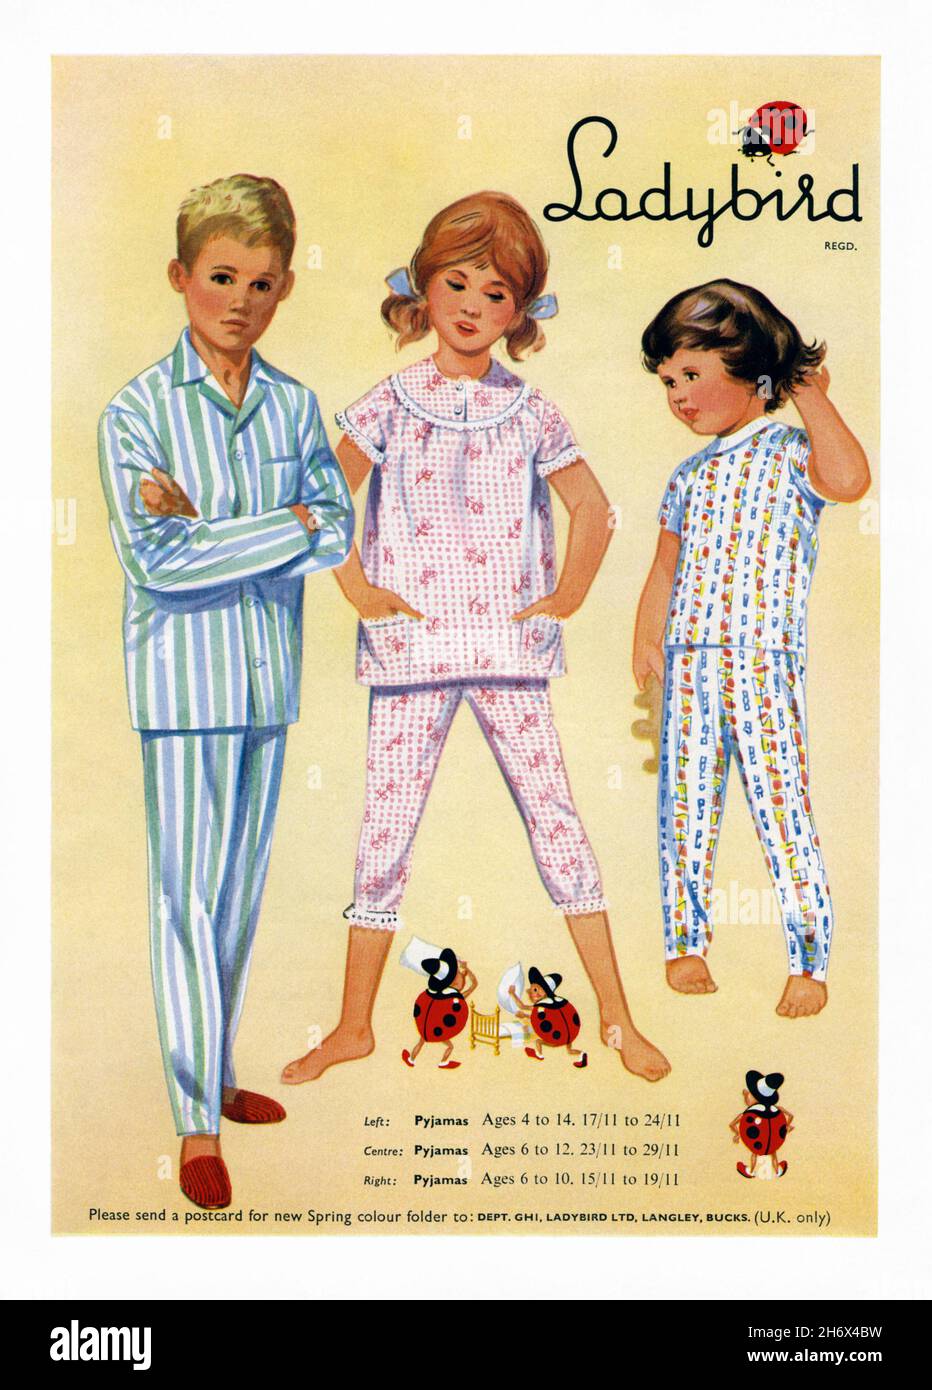 A 1960s advert for Ladybird children’s sleepwear. The advert appeared in a magazine published in the UK in March 1965. The illustration shows boys and girls night apparel. Ladybird is one of the UK's best-known children's clothing brands, and has a long history dating back to the 18th century, with the Ladybird clothing name first appearing in 1938, making clothing and footwear for children aged up to the early teens, and is these days owned by The Very Group, the UK's largest online retailer – vintage 1960s graphics for editorial use. Stock Photo